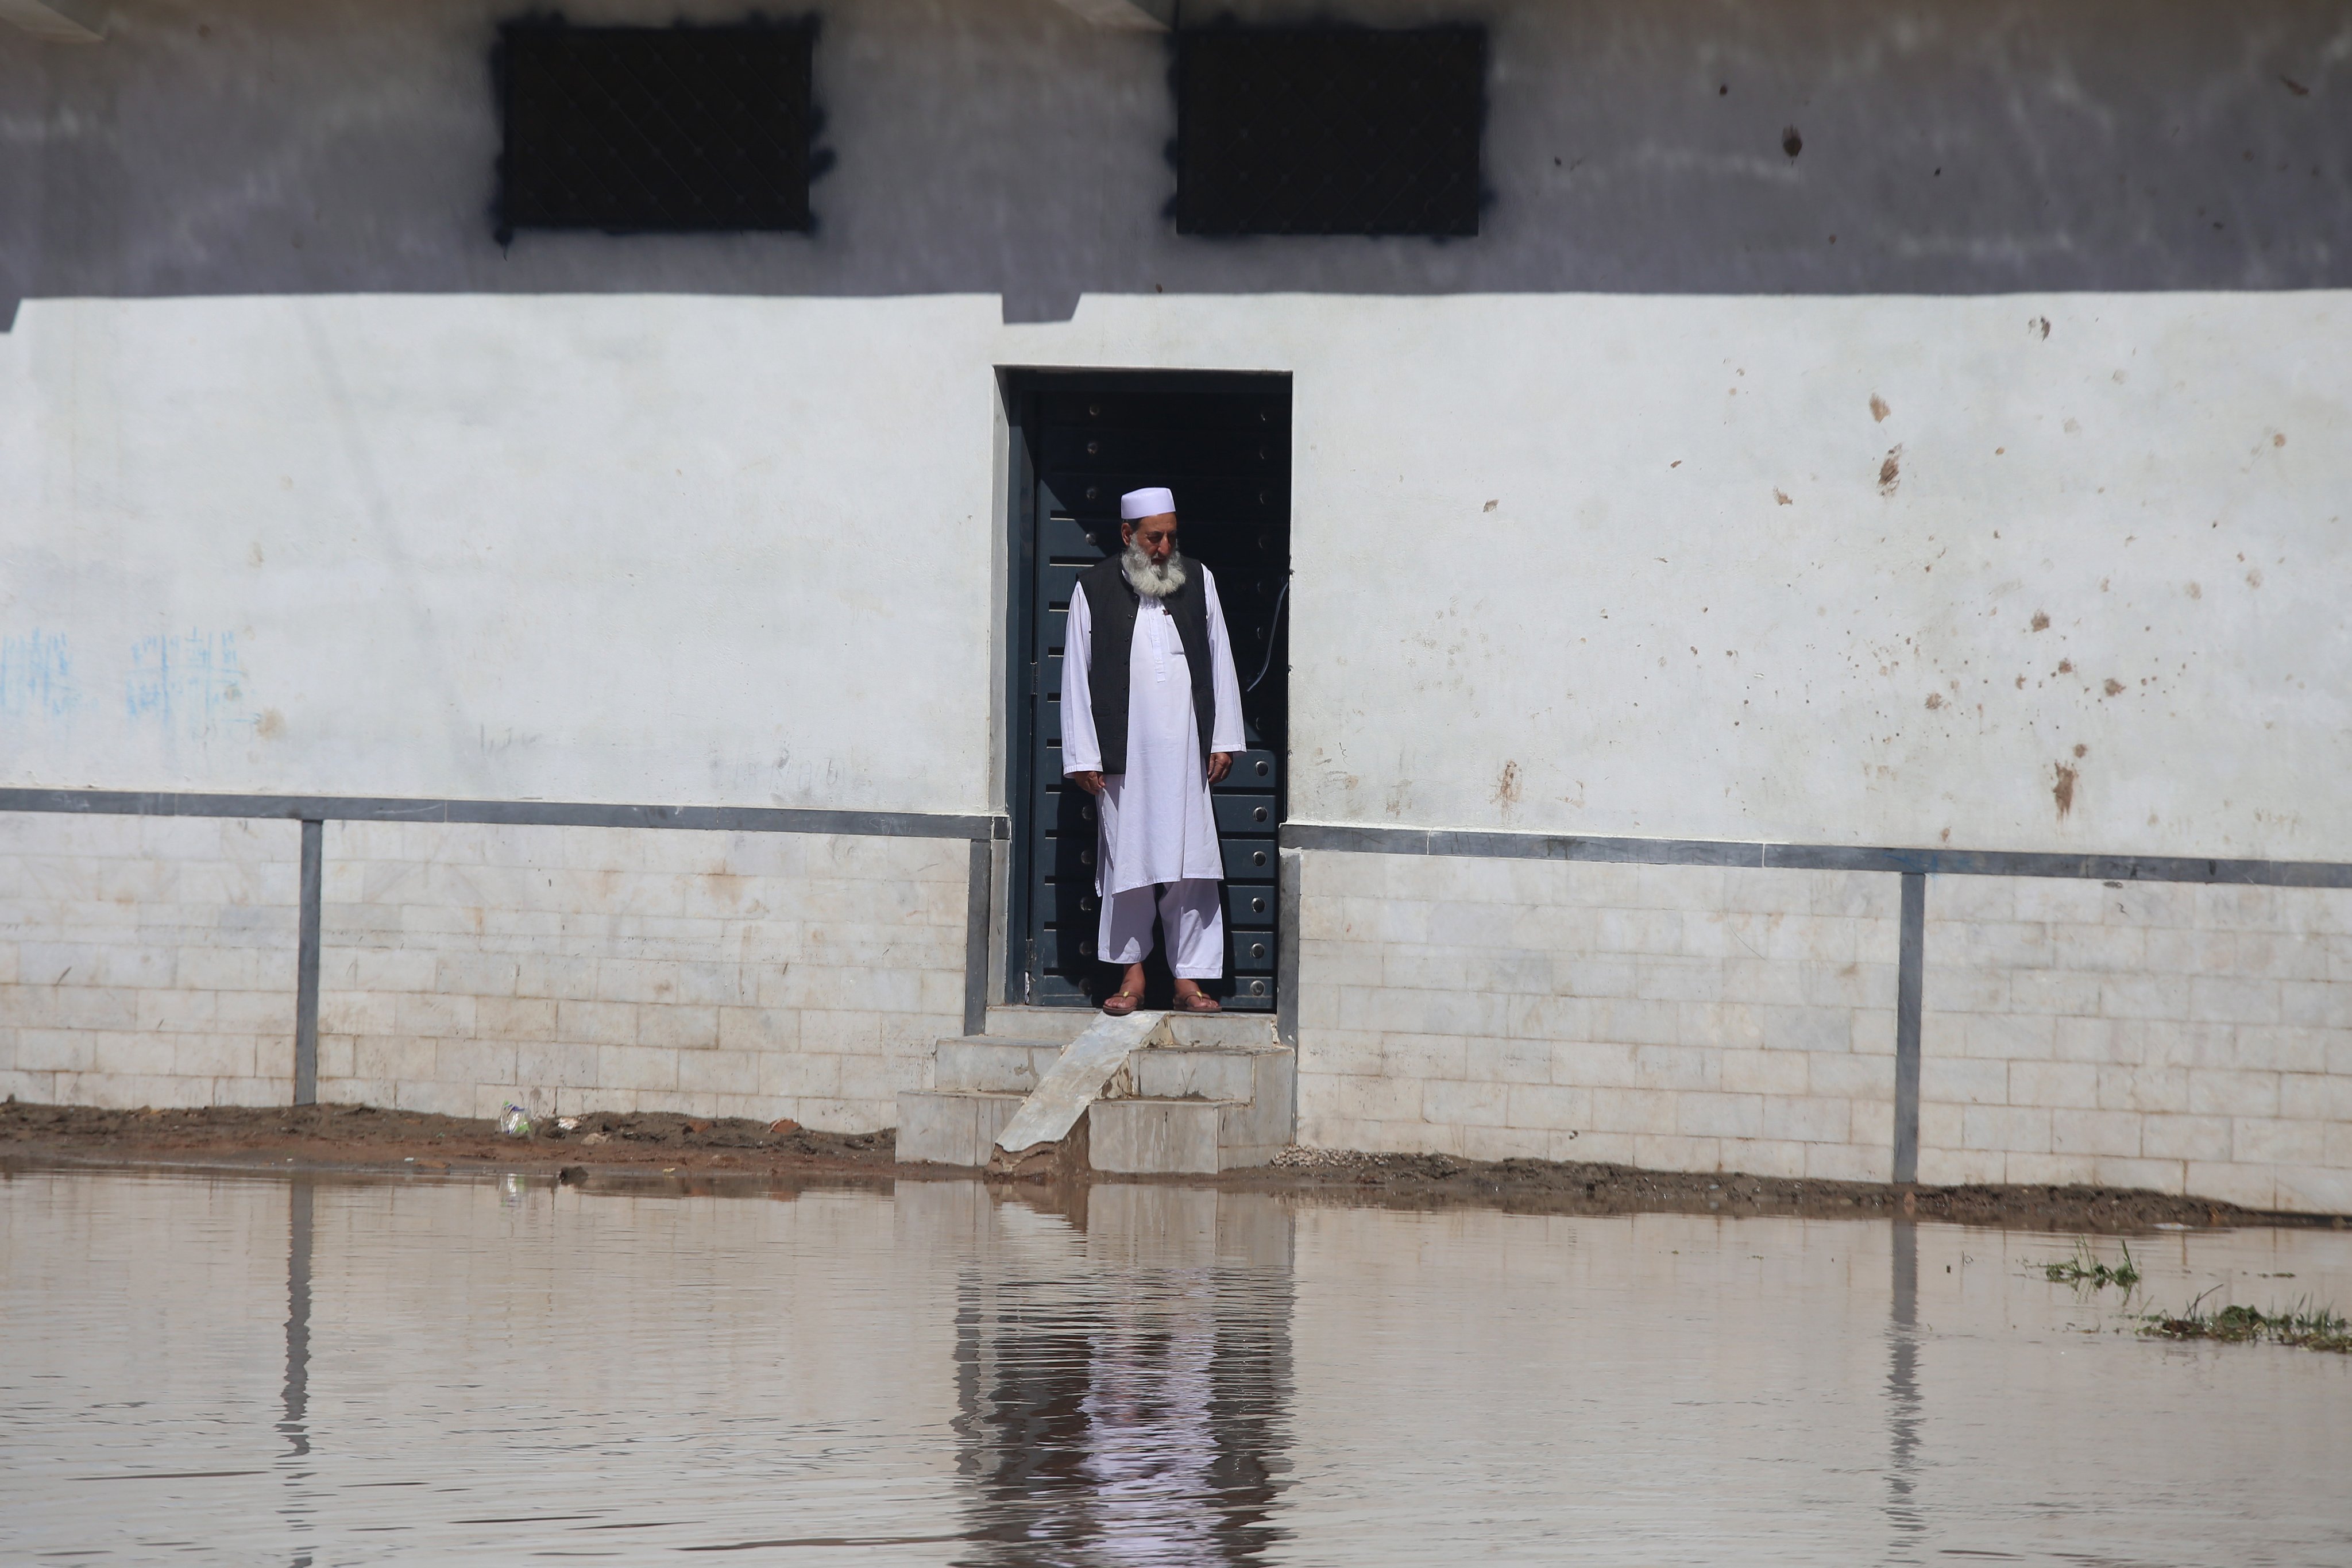 A man looks out of his home at a flooded street in Khyber Pakhtunkhwa province on April 16 as Pakistan floods again. The world is drowning in information amid challenges from climate change, geopolitical tensions, outright war, artificial intelligence and more. Photo: EPA-EFE